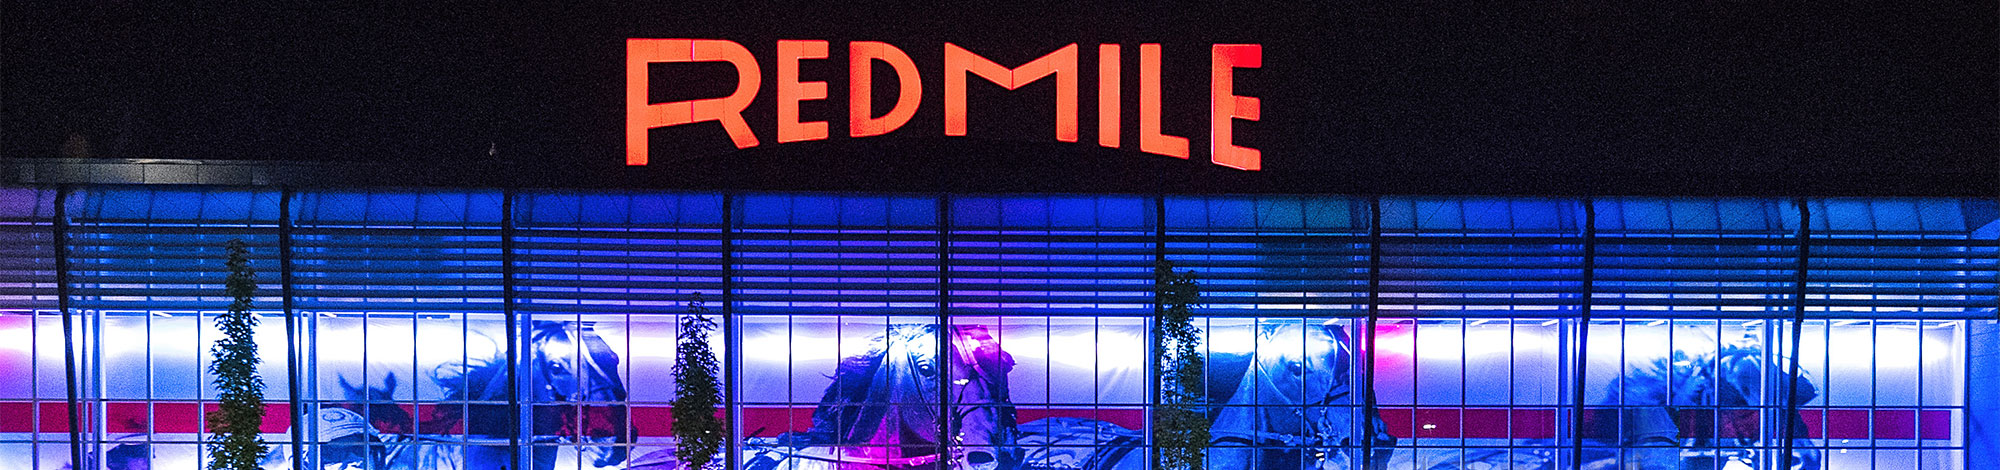 Red Mile at night